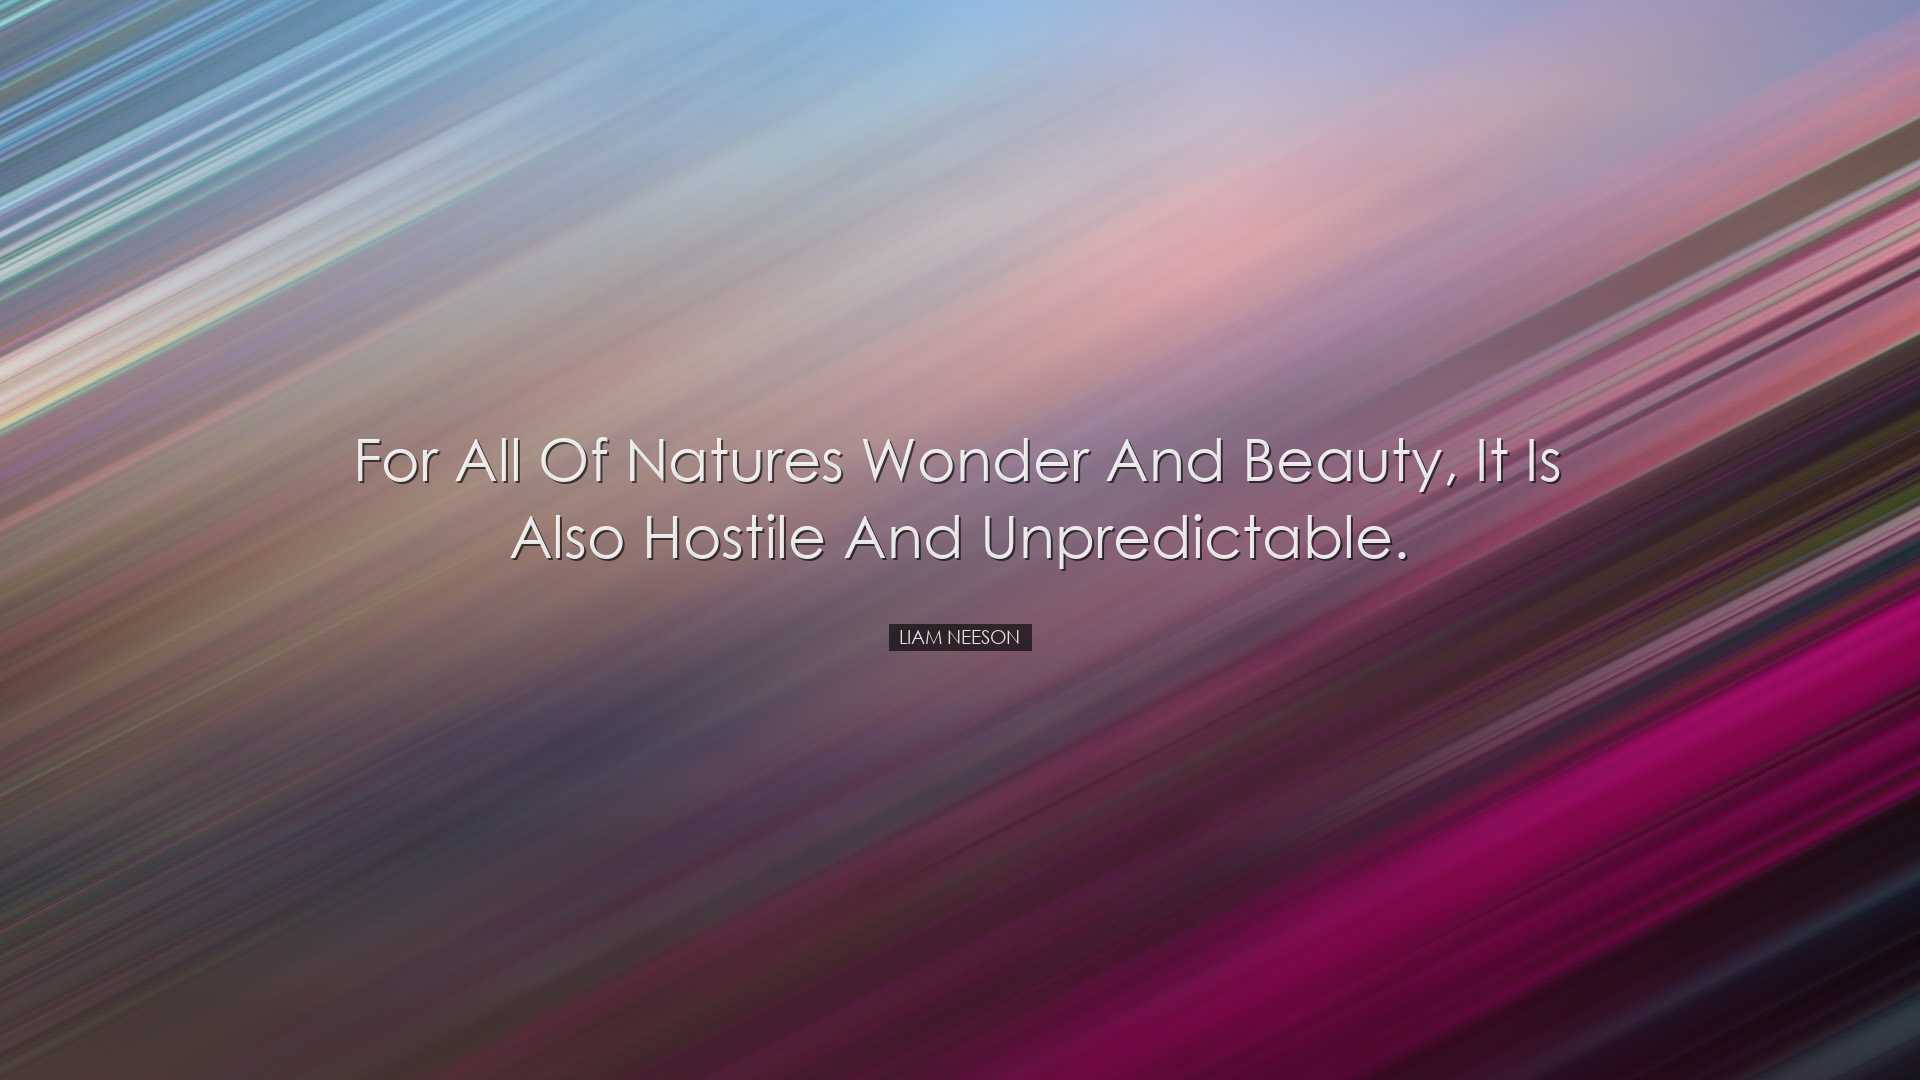 For all of natures wonder and beauty, it is also hostile and unpre